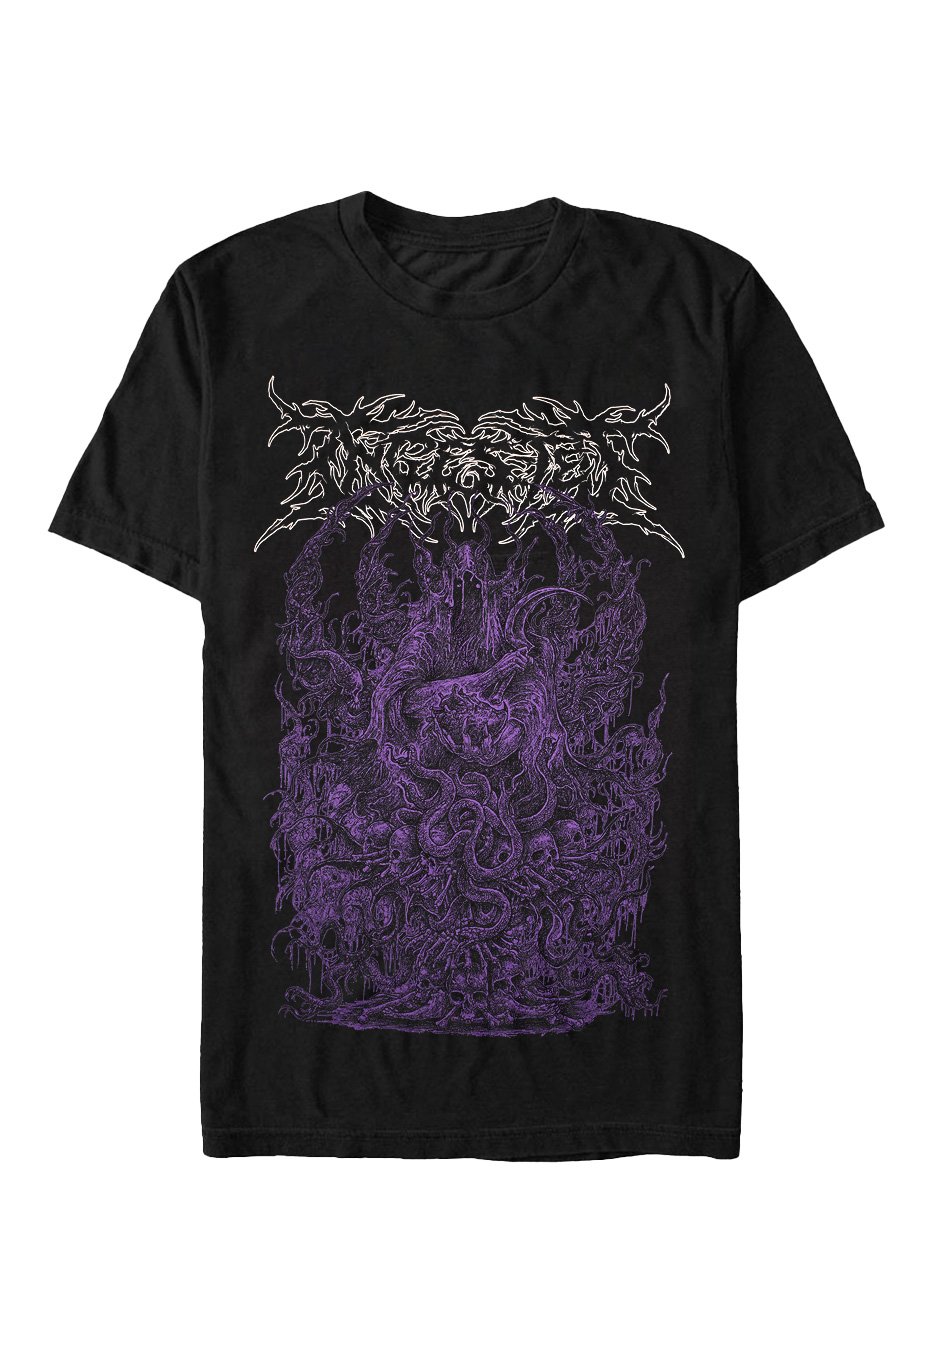 Ingested - Paragon Of Purity - T-Shirt